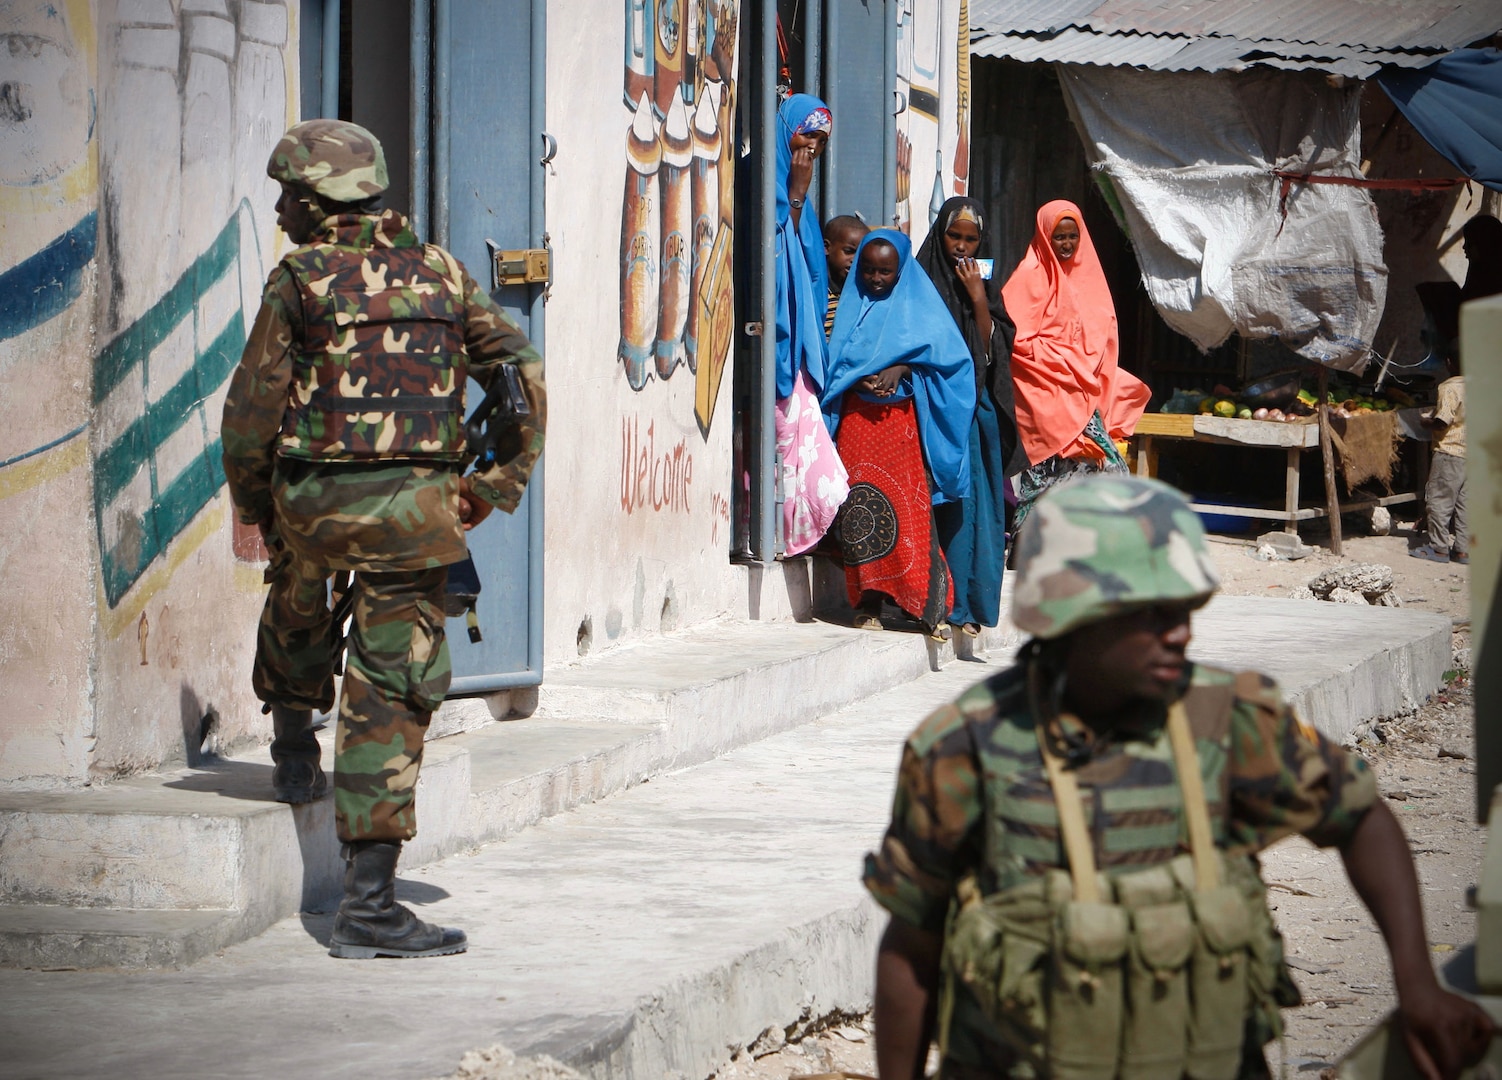 SOMALIA, Mogadishu: In a photograph taken 5 Dec and released by the African Union-United Nations Information Support Team 8 Dec, Somali women look on as Ugandan soldier serving with the African Union Mission in Somalia (AMISOM) take up defensive positions in Torfiq market in the Yaaqshid District of northern Mogadishu. In the face of a surge of car bombings and improvised explosive device (IED) attacks, the 9,700-strong African Union force continues to conduct security and counter-IED operations in and around the Somali capital. AU-UN IST PHOTO / STUART PRICE.